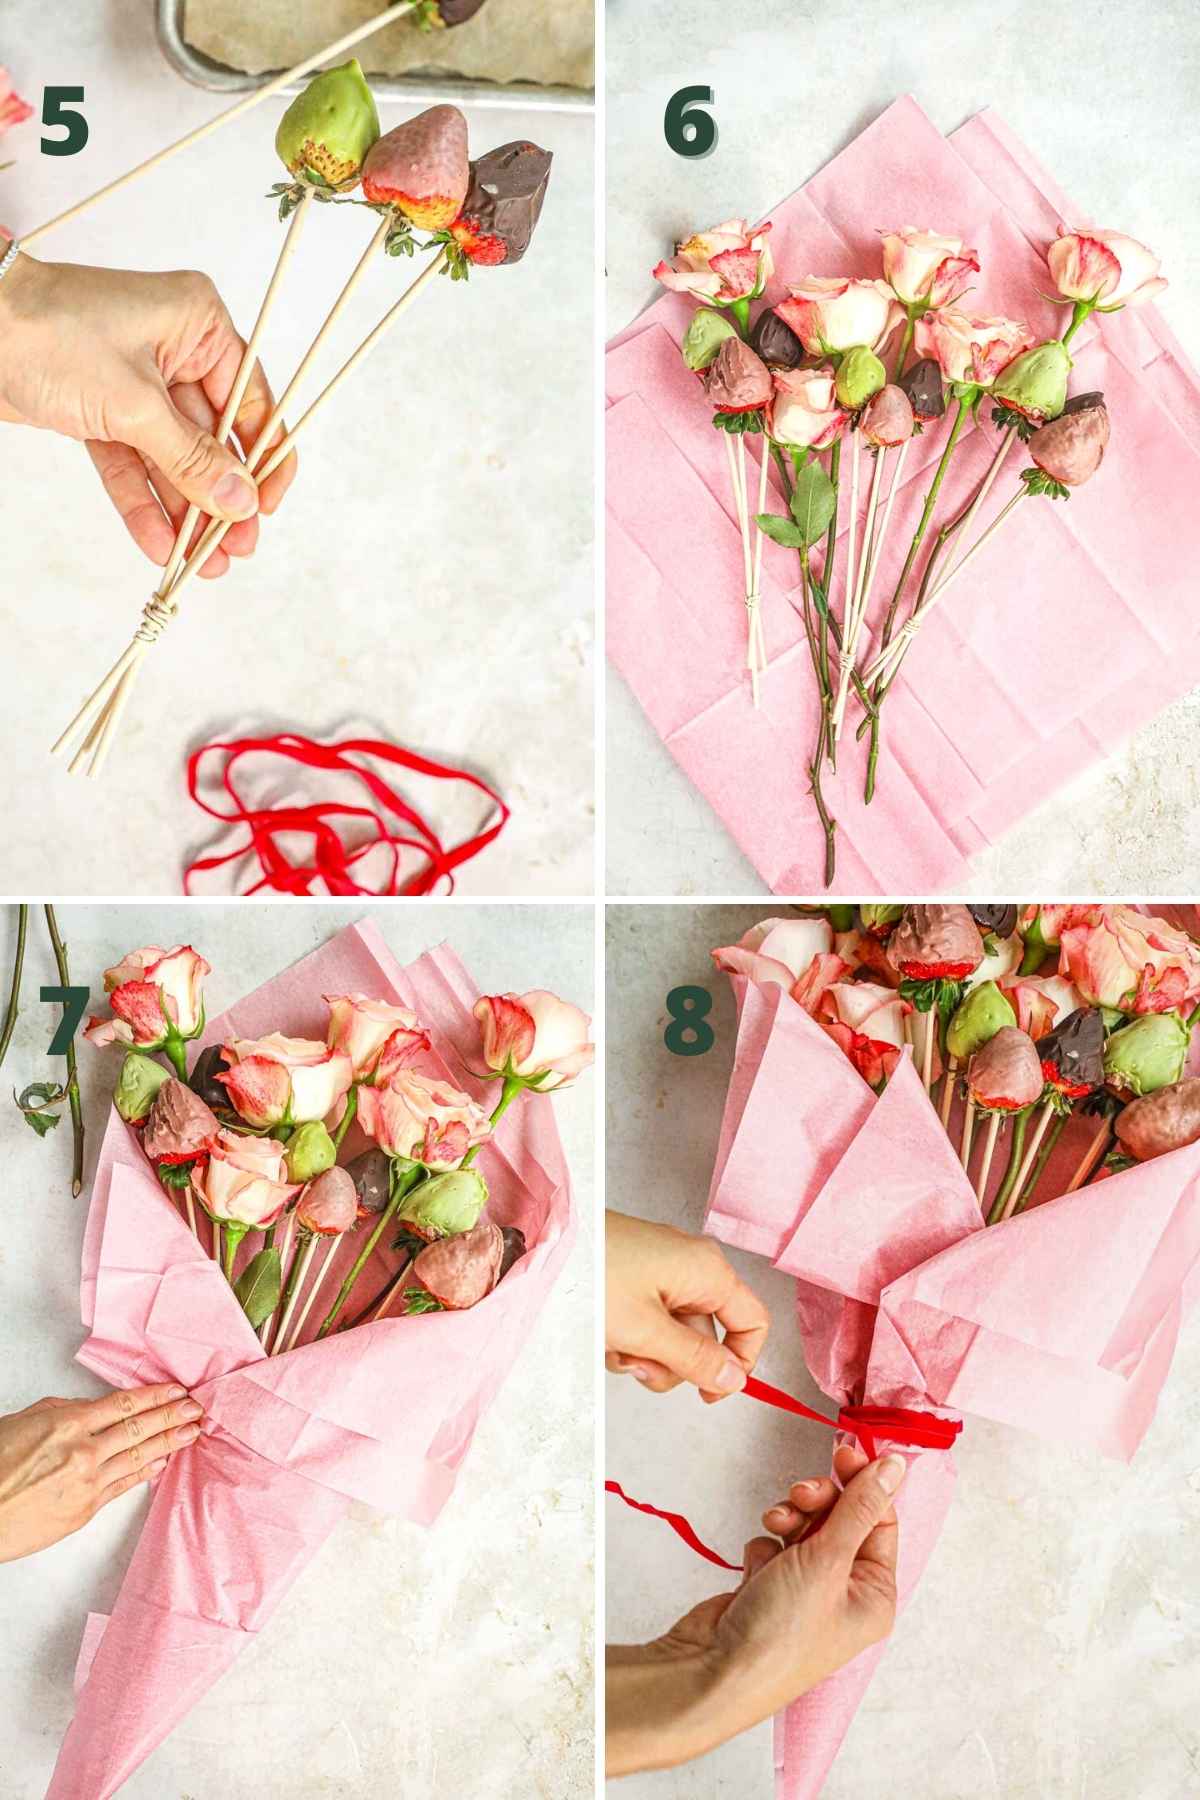 Steps to make chocolate-covered strawberry bouquet, including tying the bamboo skewers into groups with rubber bands, placing the berry skewers and roses on tissue paper, wrapping the skewers and flowers, and tying the bouquet with ribbon.